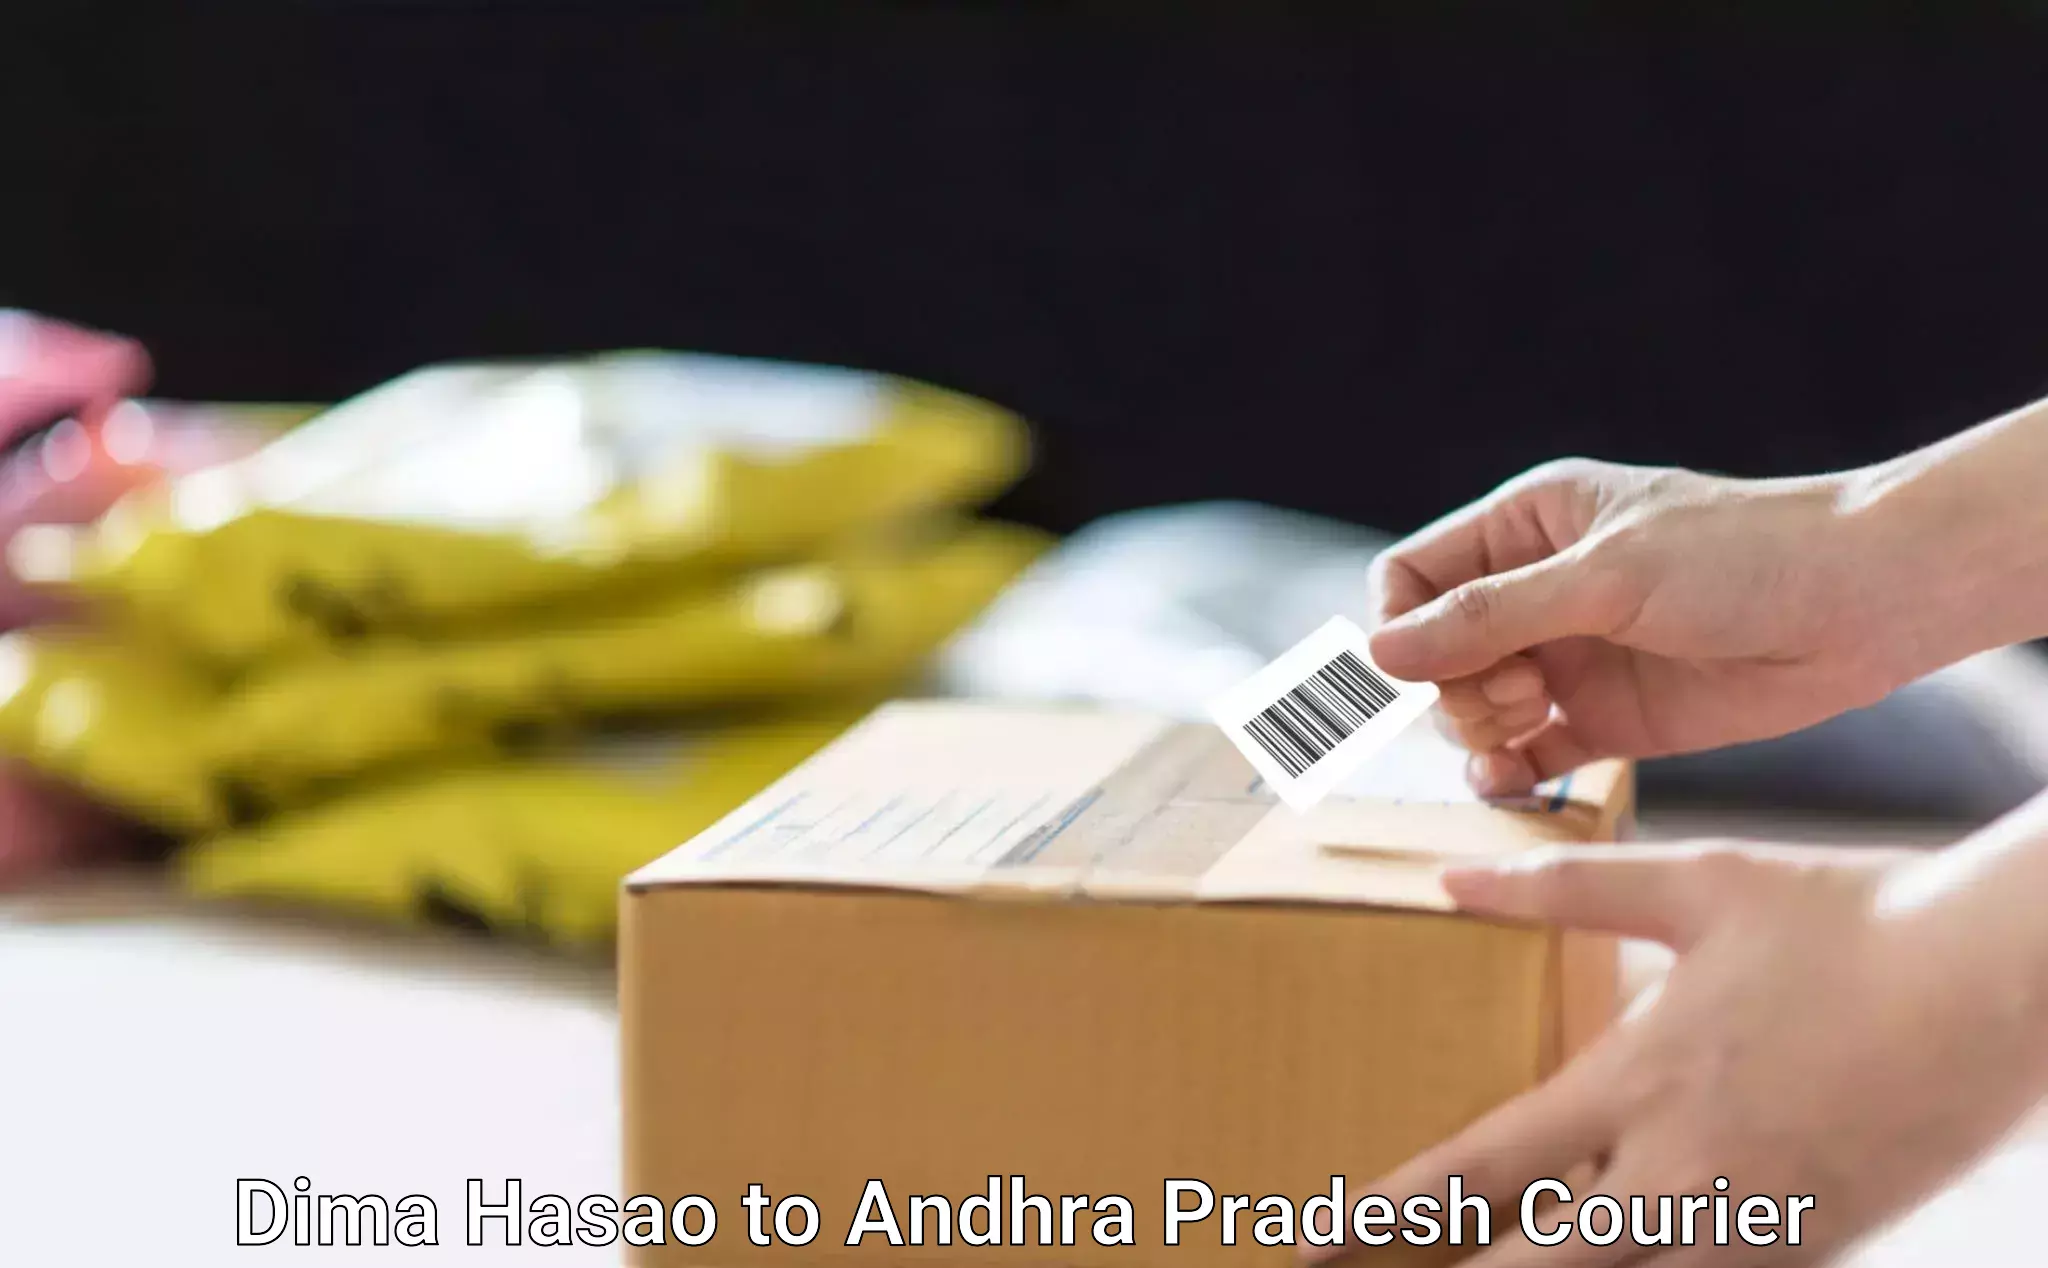 Automated parcel services Dima Hasao to Andhra Pradesh